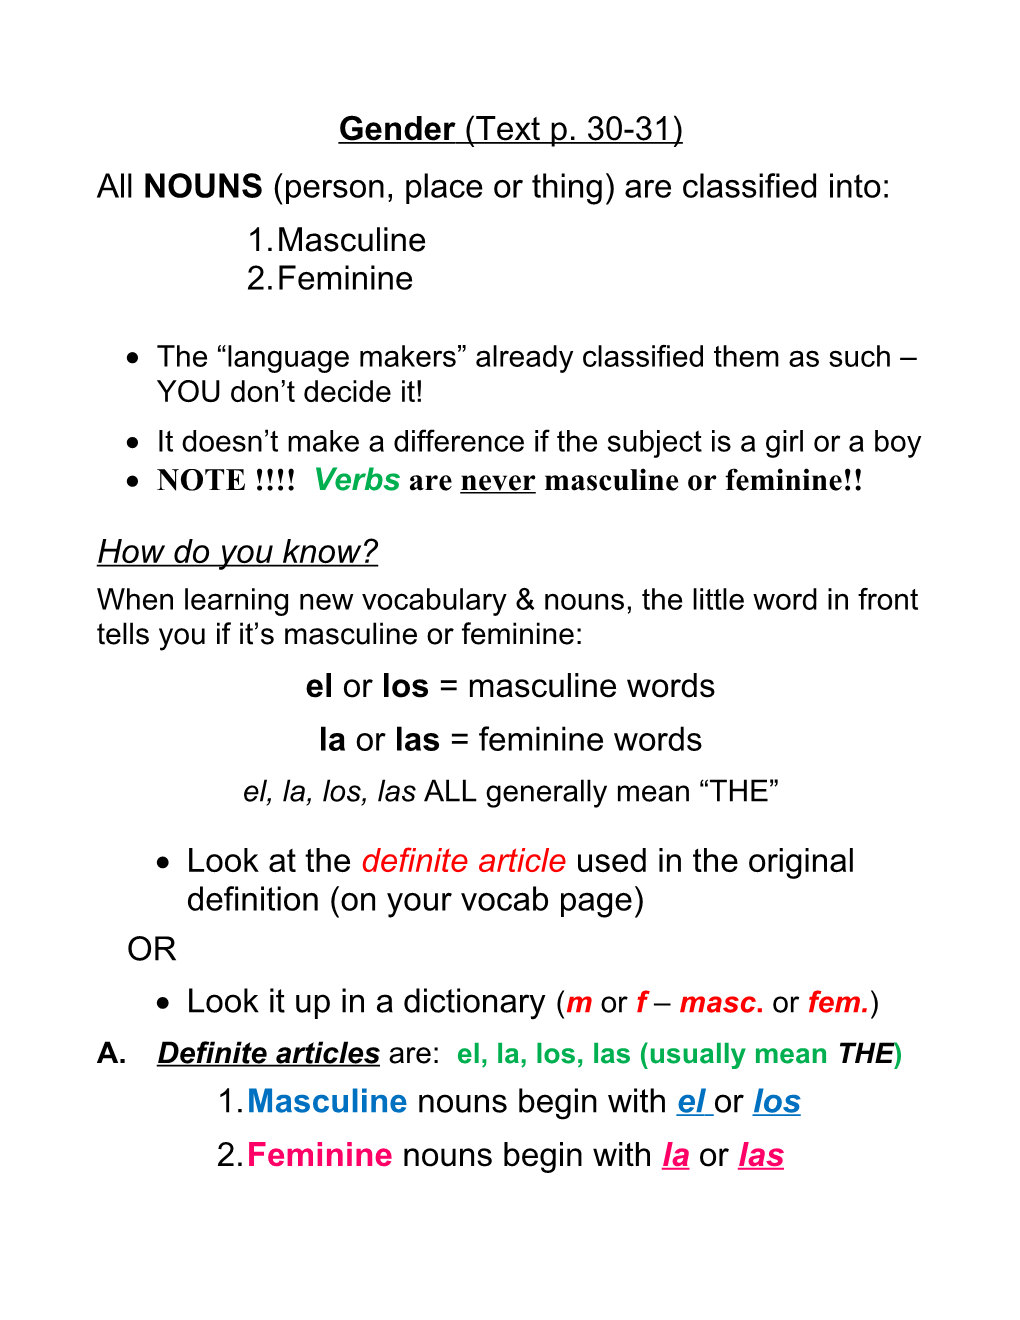 All NOUNS (Person, Place Or Thing) Are Classified Into